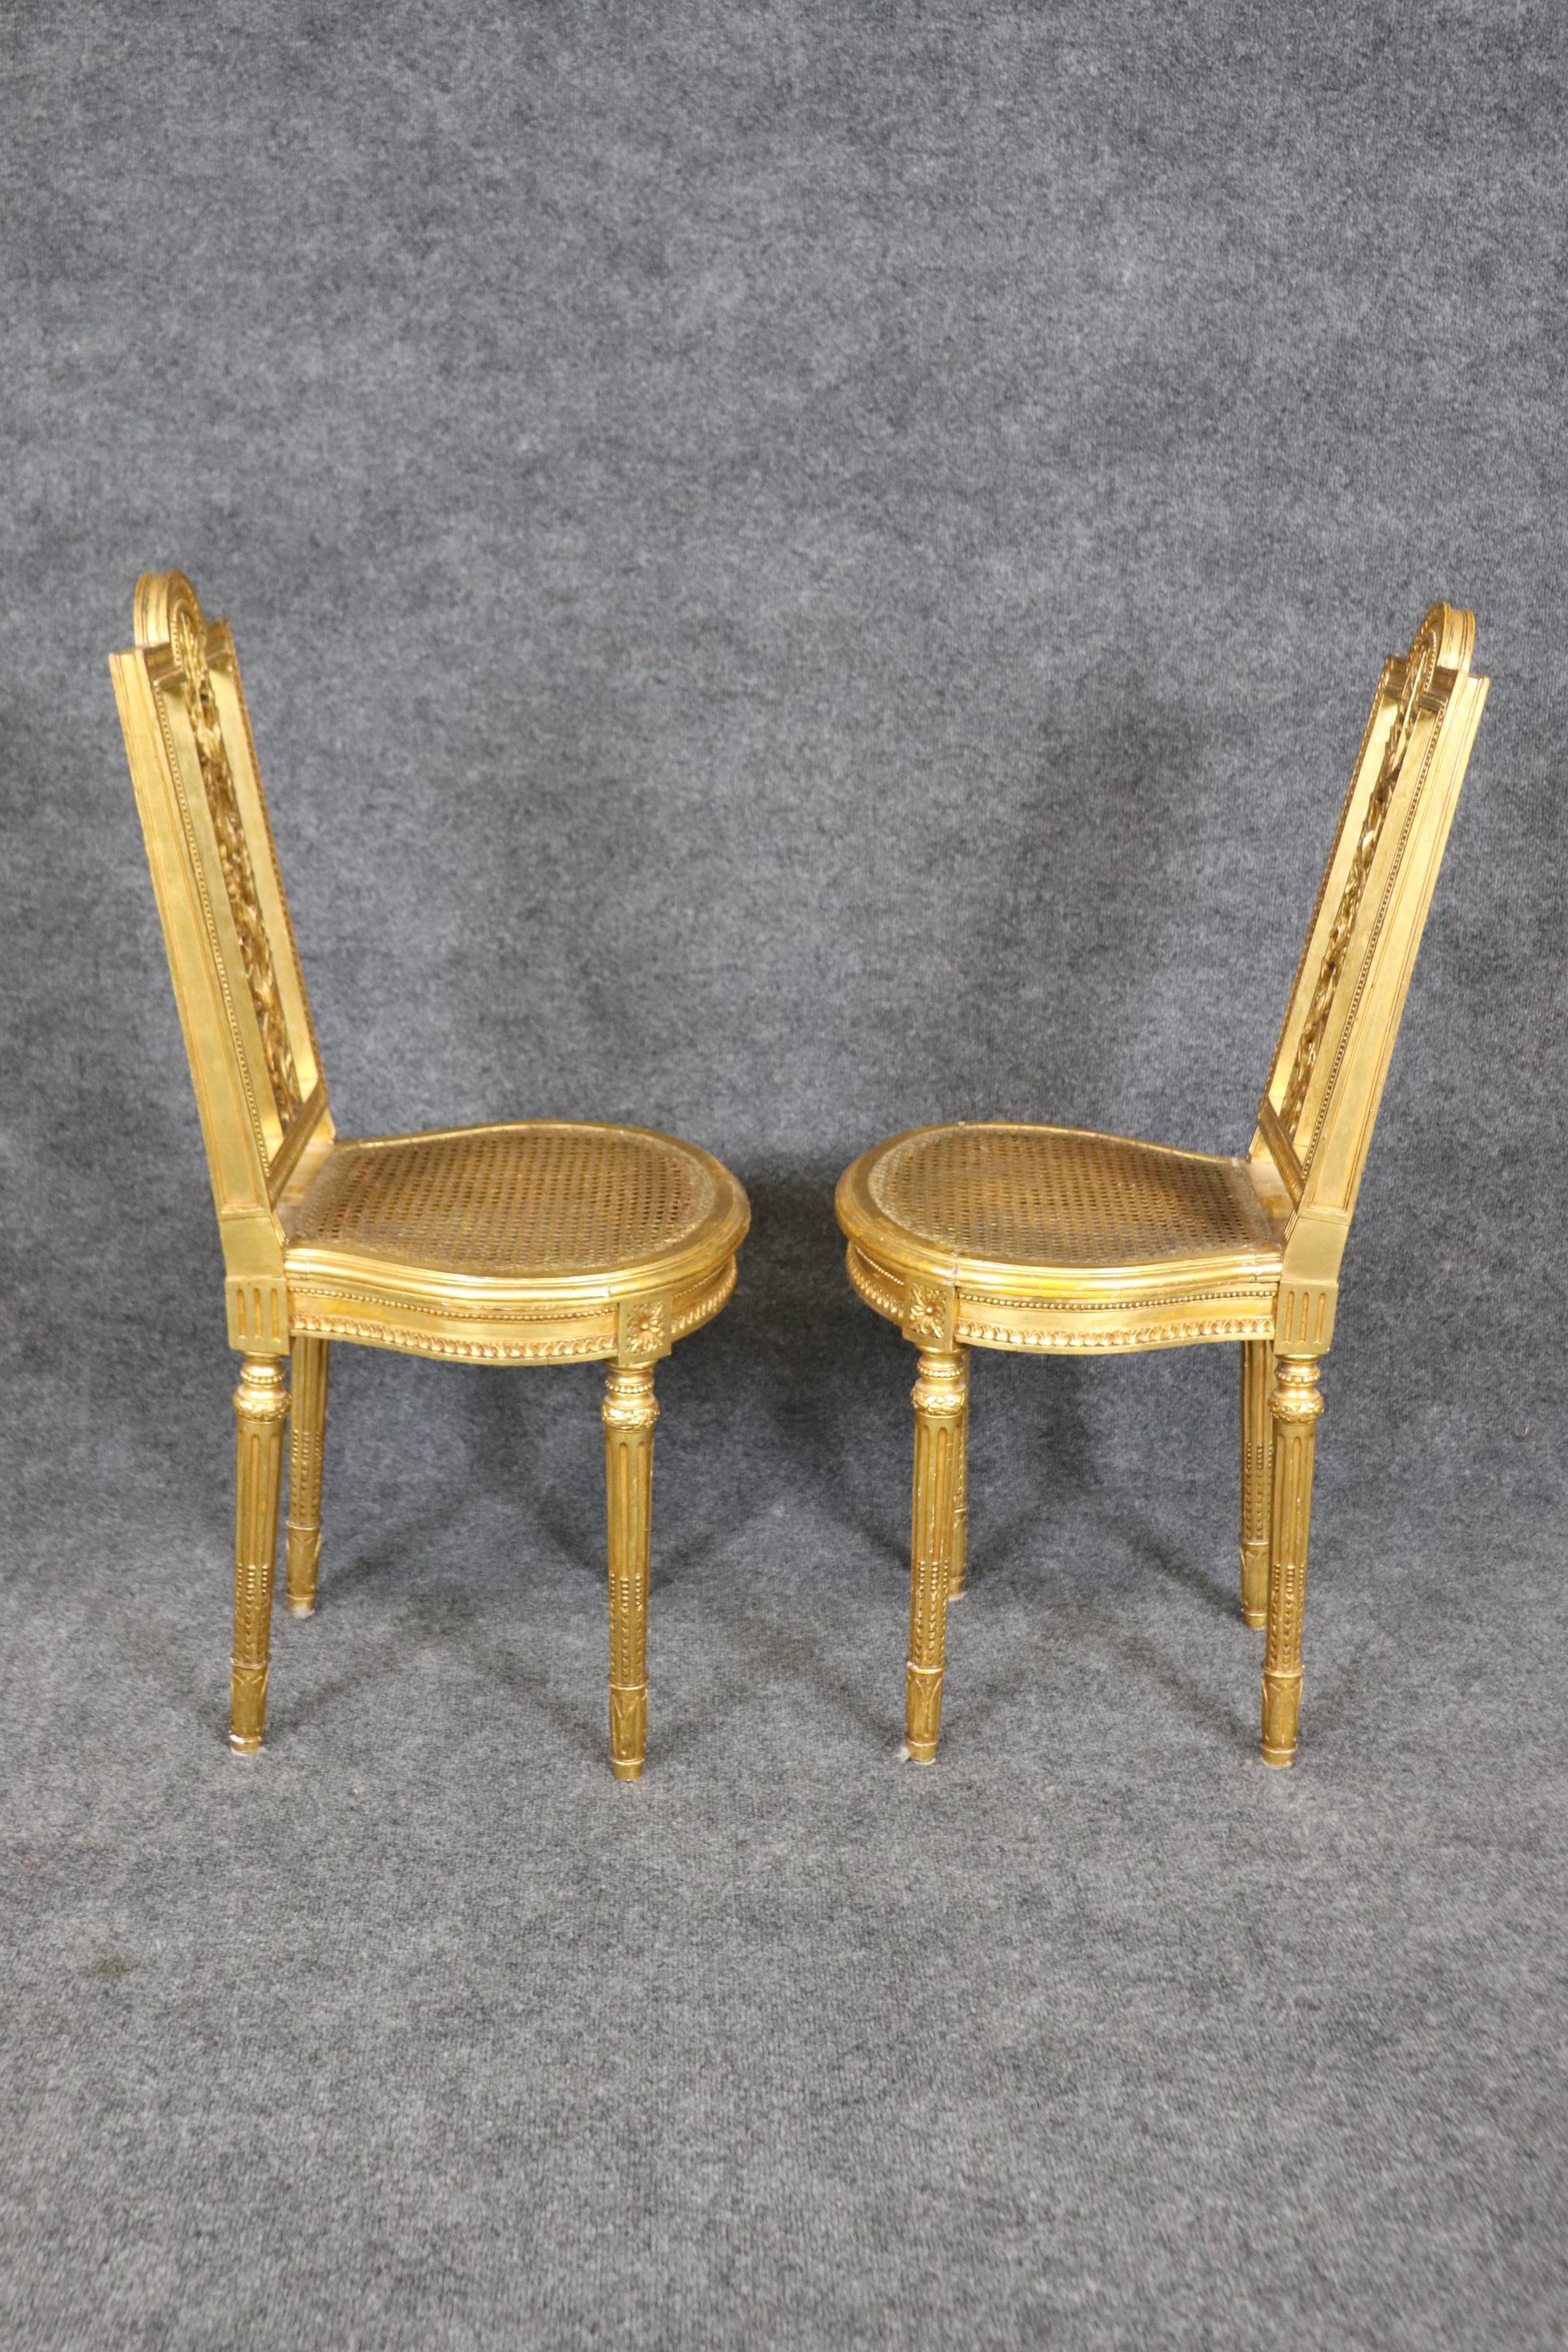 Fine Pair Bright Gilded French Cane Louis XVI Directoire Side Parlor Chairs For Sale 5